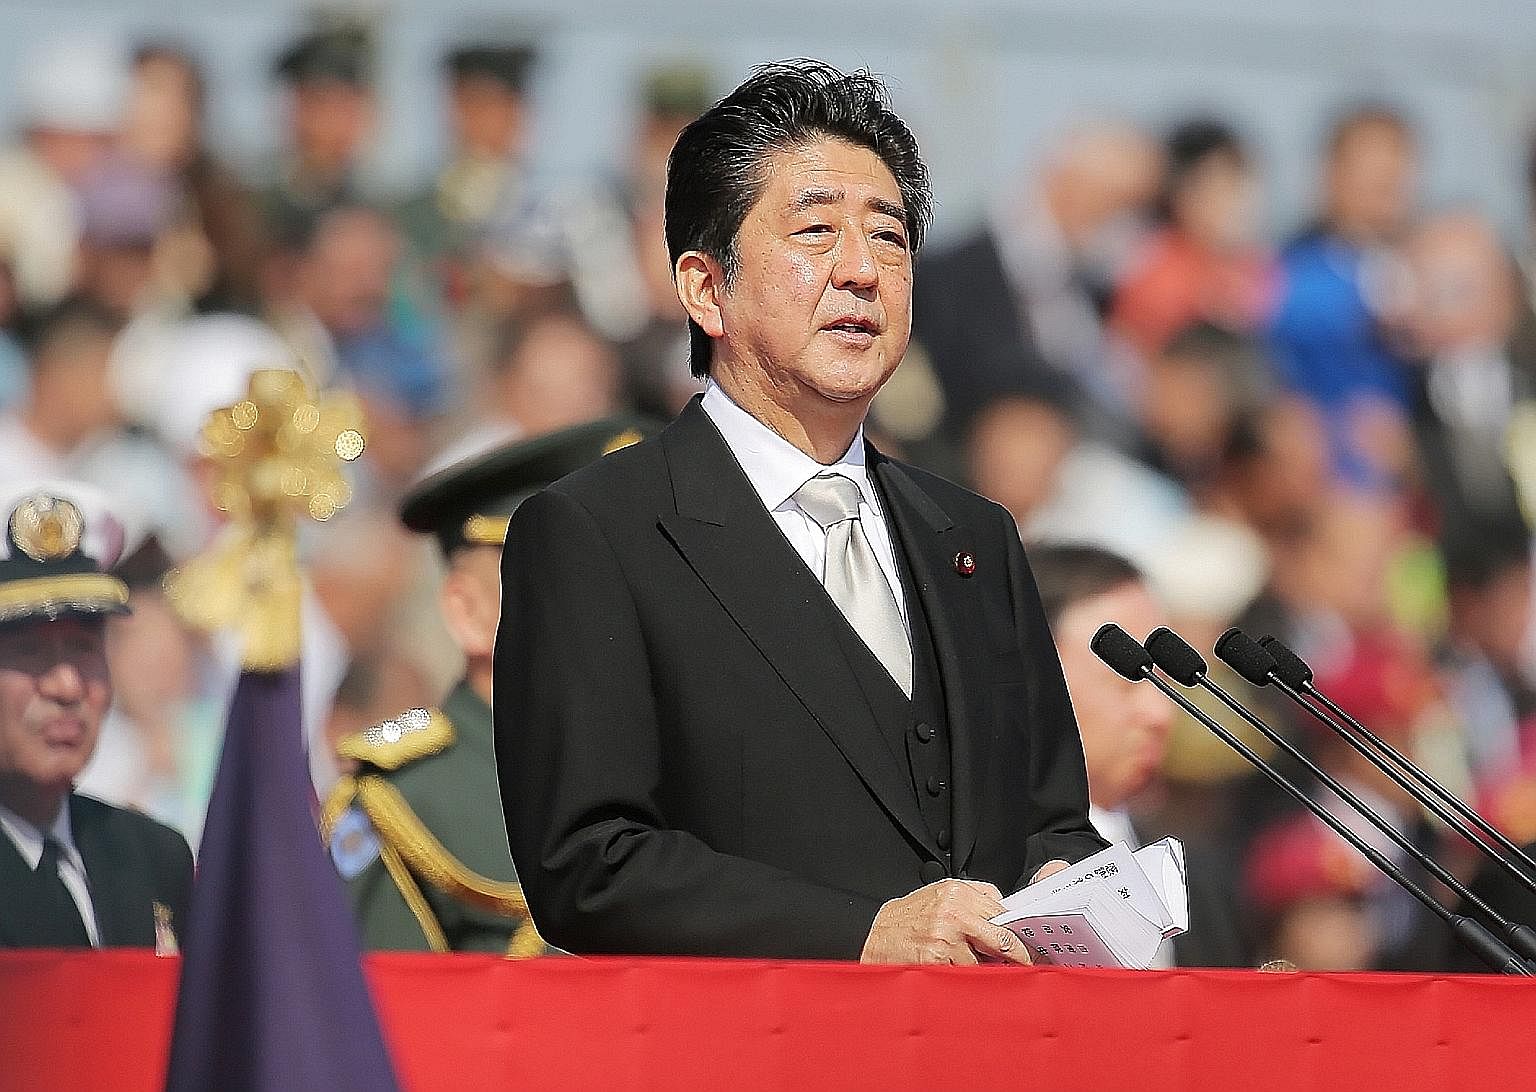 Mr Abe was due to step down as LDP president in September 2018 if not for the rule change - which must be formally approved at a party convention next March.